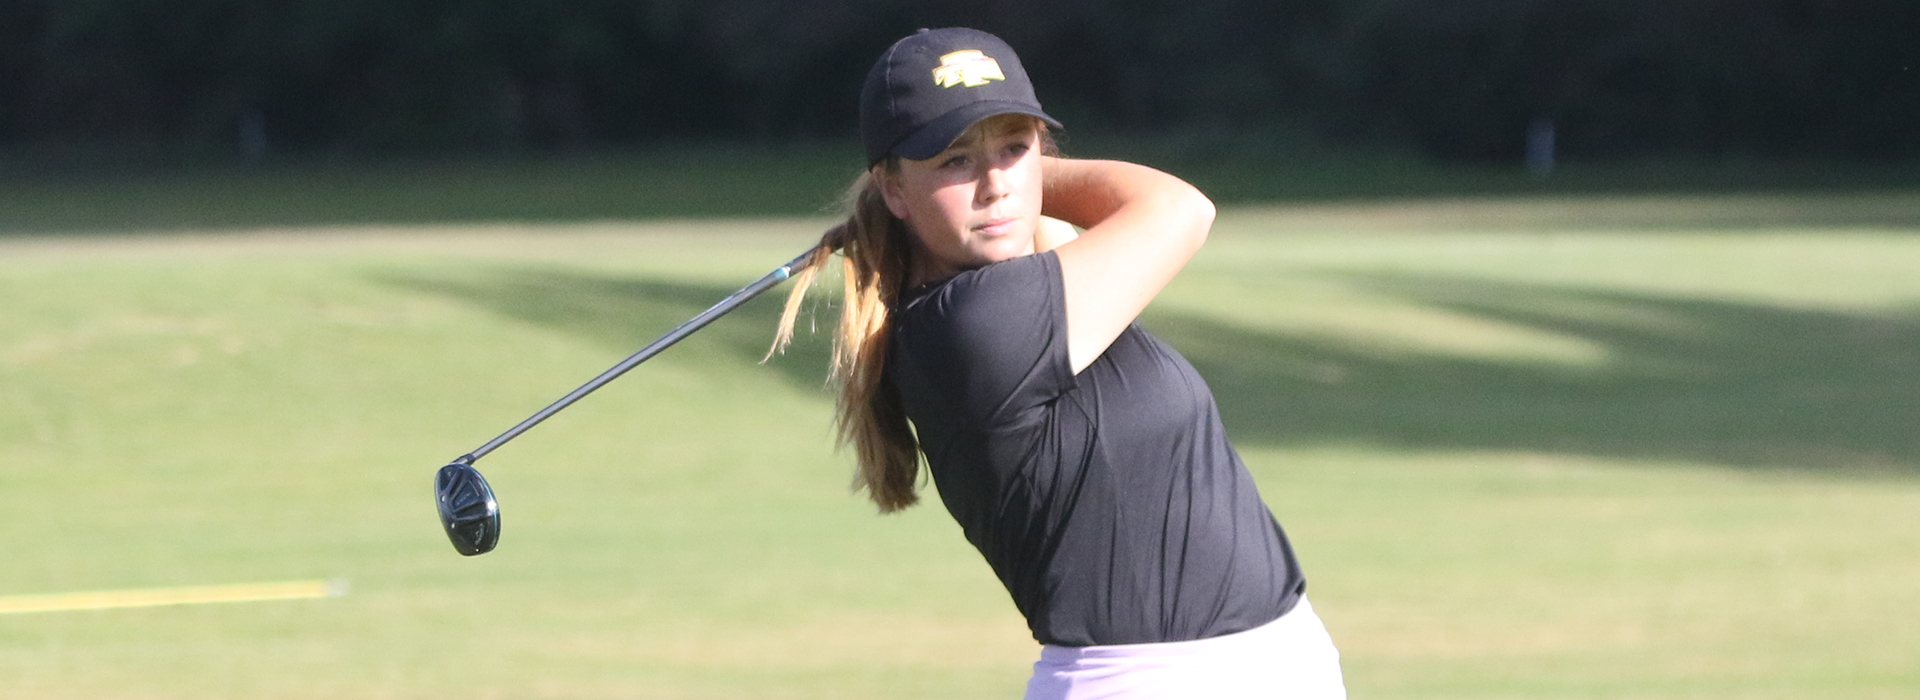 Golden Eagles 11th following first round at UNCG Collegiate